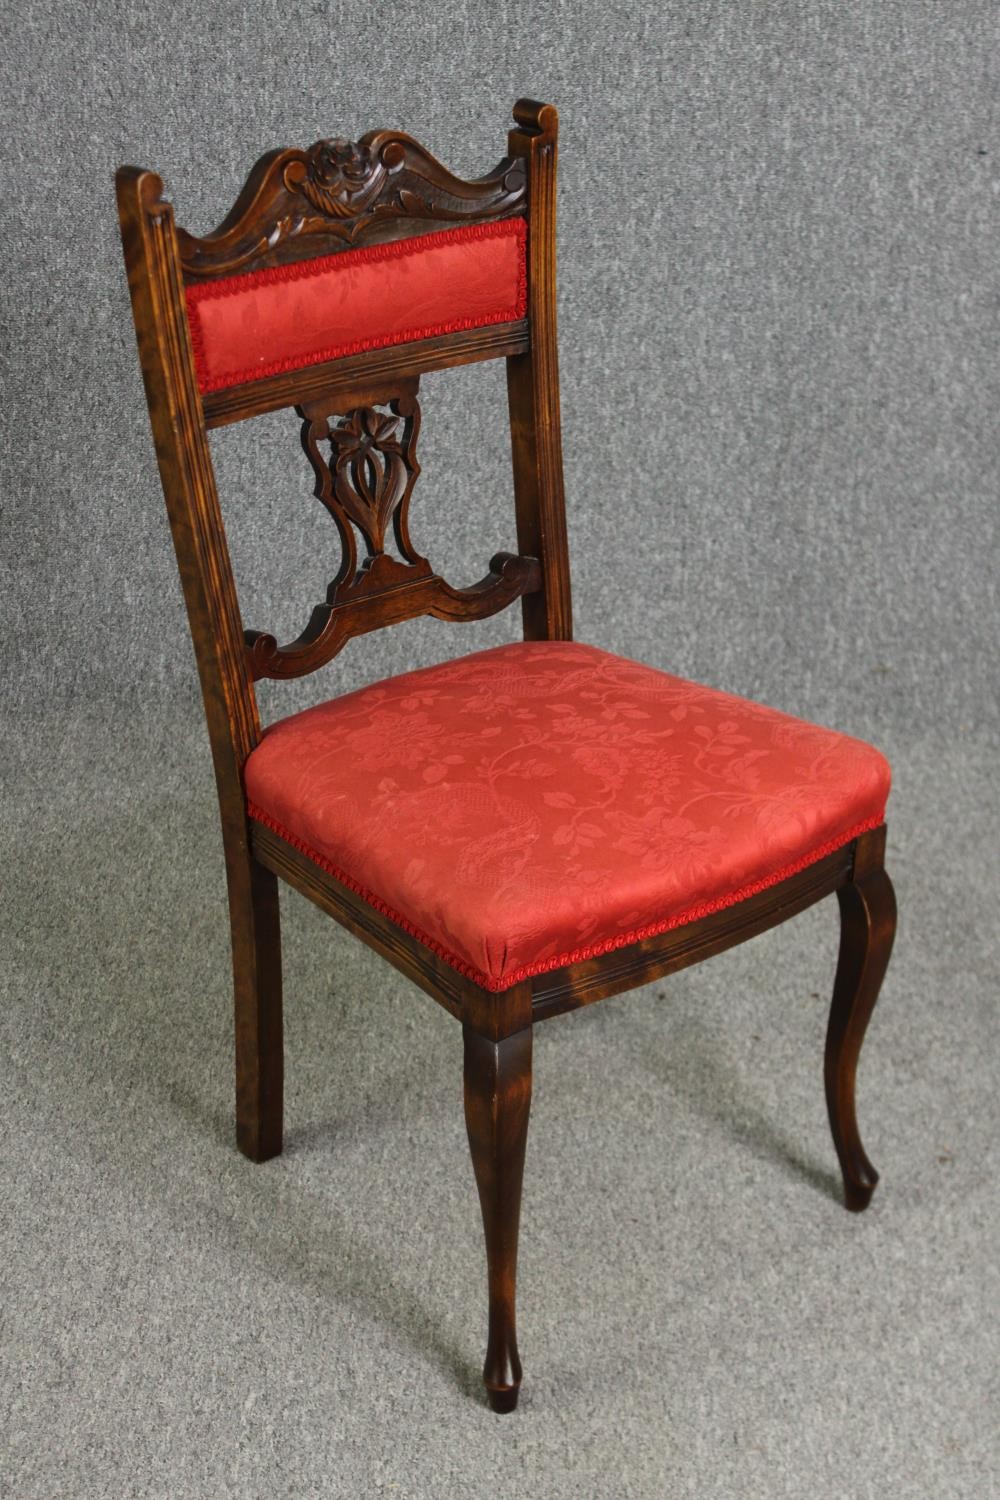 A set of four late Victorian walnut salon chairs in red damask upholstery - Image 3 of 6